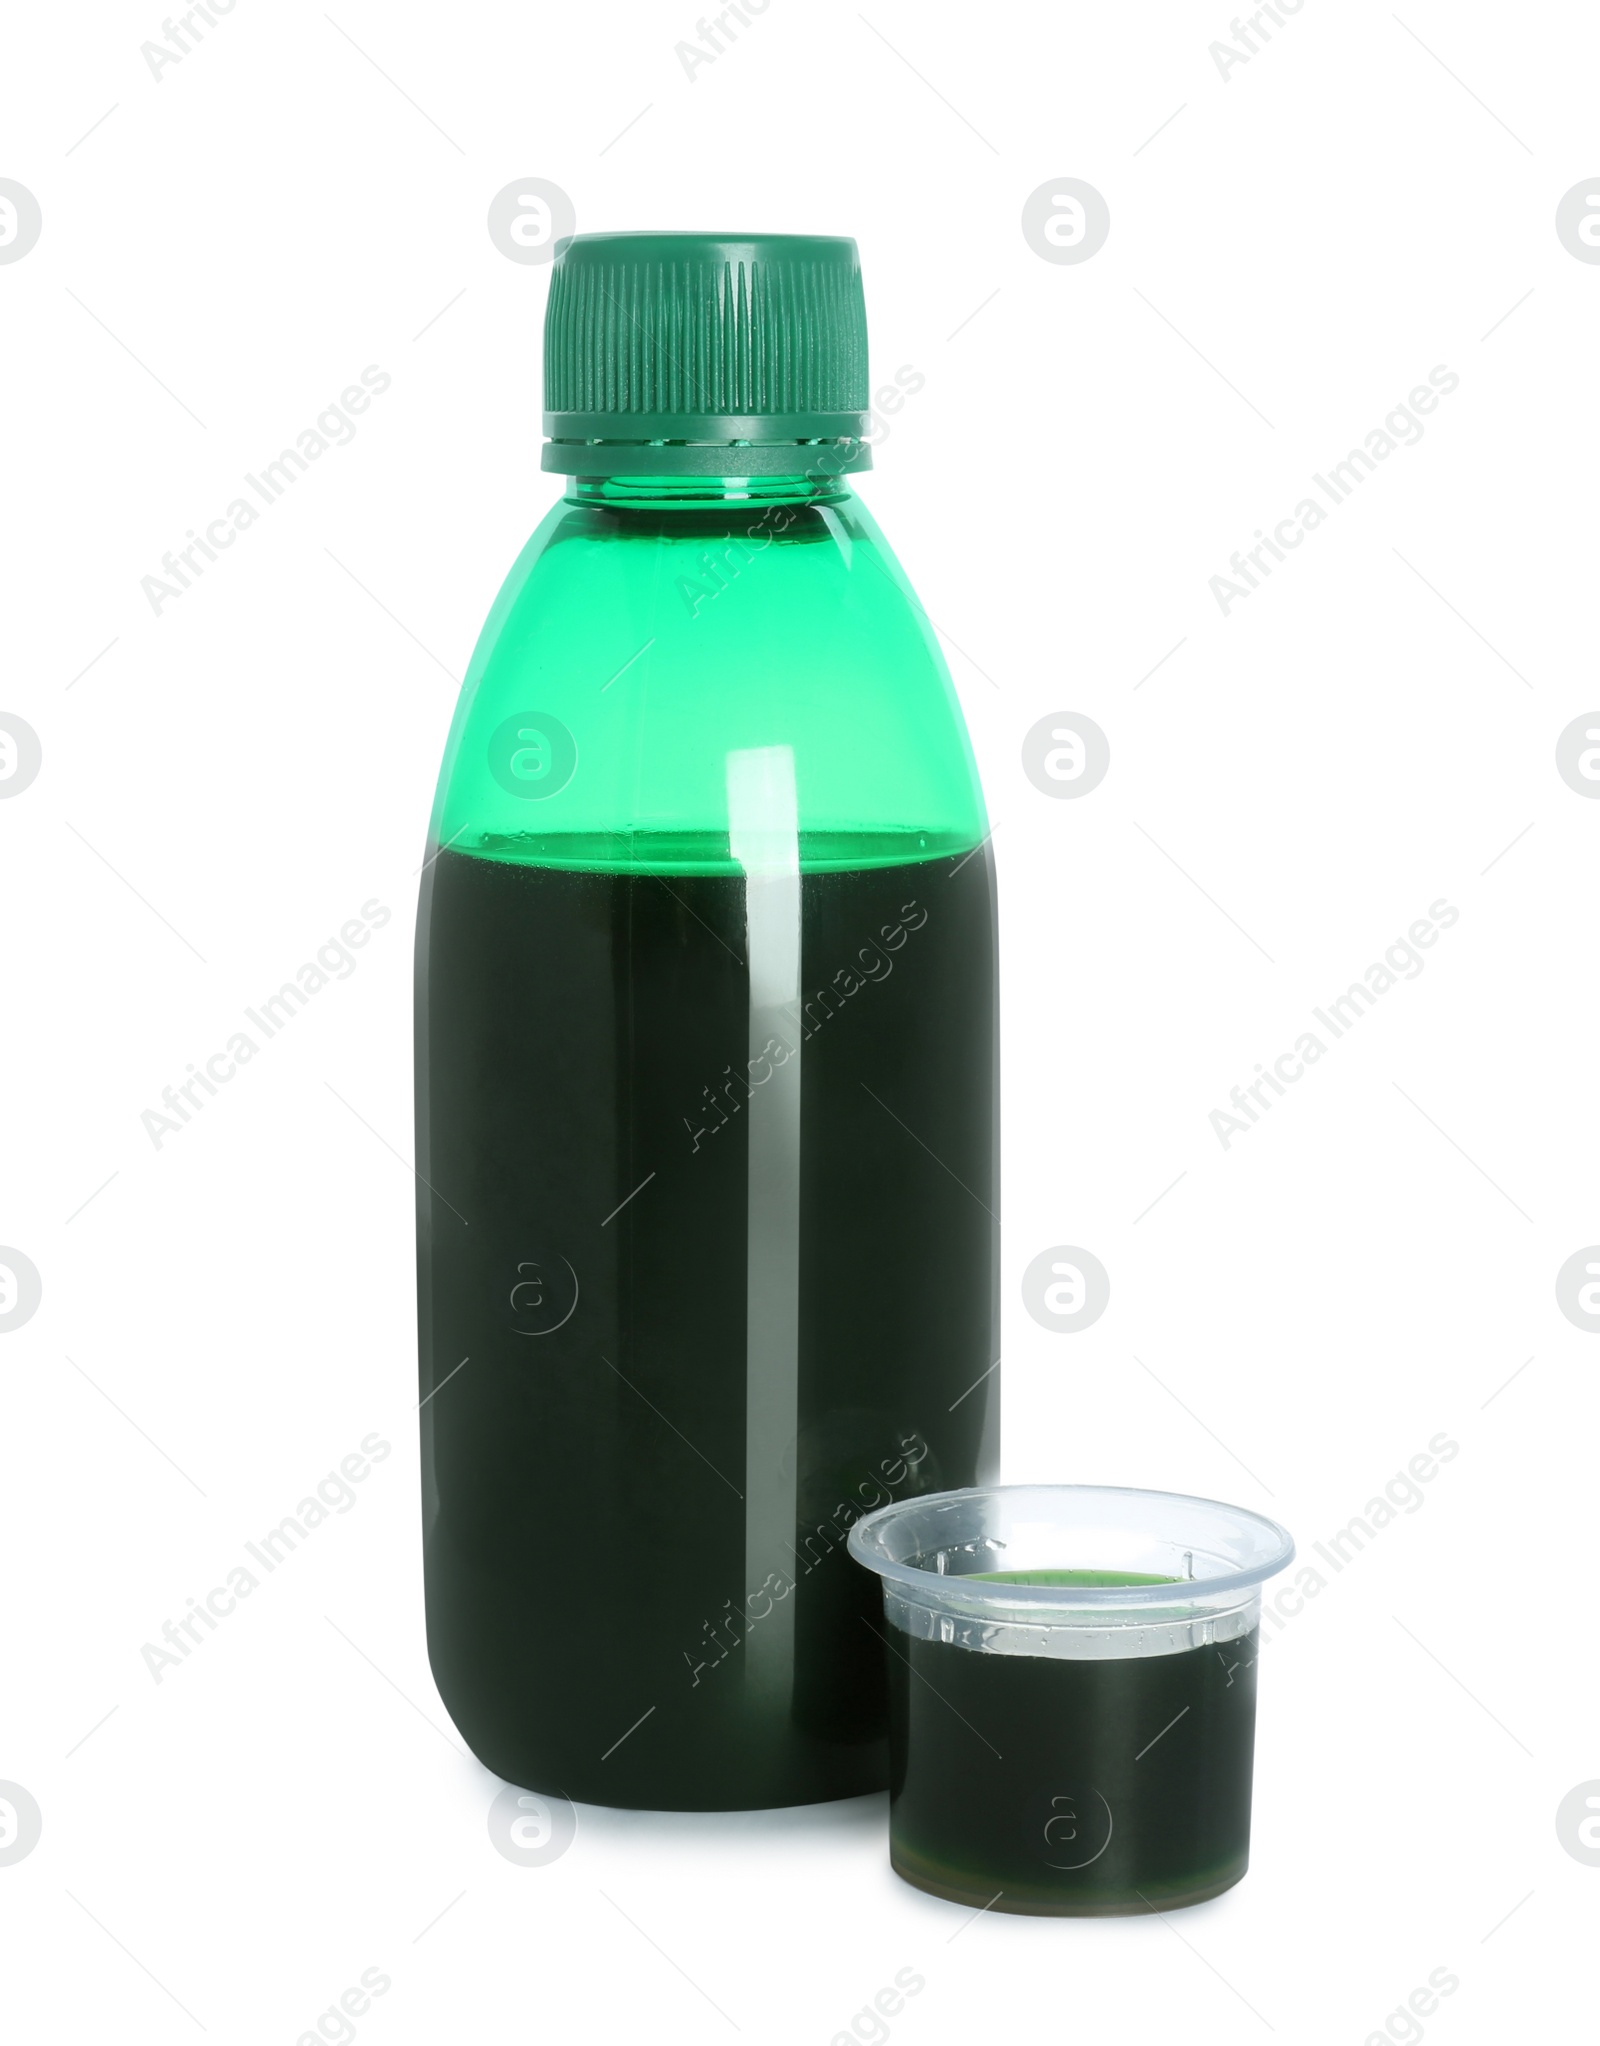 Photo of Bottle of cough syrup and measuring cup on white background